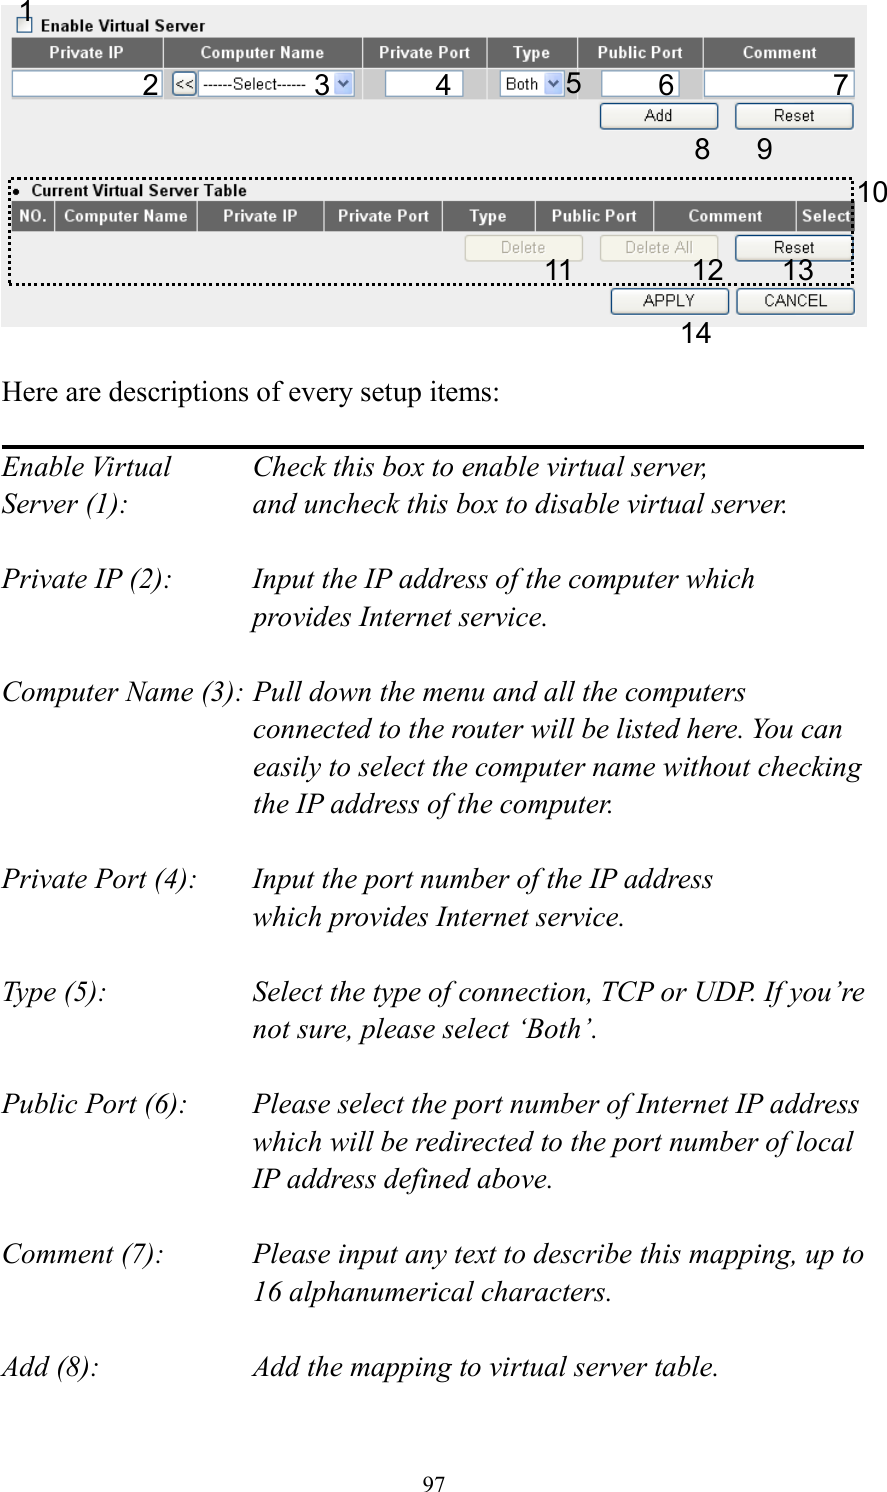 97   Here are descriptions of every setup items:  Enable Virtual      Check this box to enable virtual server, Server (1):       and uncheck this box to disable virtual server.  Private IP (2):      Input the IP address of the computer which           provides Internet service.  Computer Name (3): Pull down the menu and all the computers connected to the router will be listed here. You can easily to select the computer name without checking the IP address of the computer.  Private Port (4):    Input the port number of the IP address           which provides Internet service.  Type (5):    Select the type of connection, TCP or UDP. If you’re not sure, please select ‘Both’.  Public Port (6):    Please select the port number of Internet IP address which will be redirected to the port number of local IP address defined above.  Comment (7):    Please input any text to describe this mapping, up to 16 alphanumerical characters.  Add (8):        Add the mapping to virtual server table.  1 2 3 4 5 8 9 10 11 12 13 14 7 6 